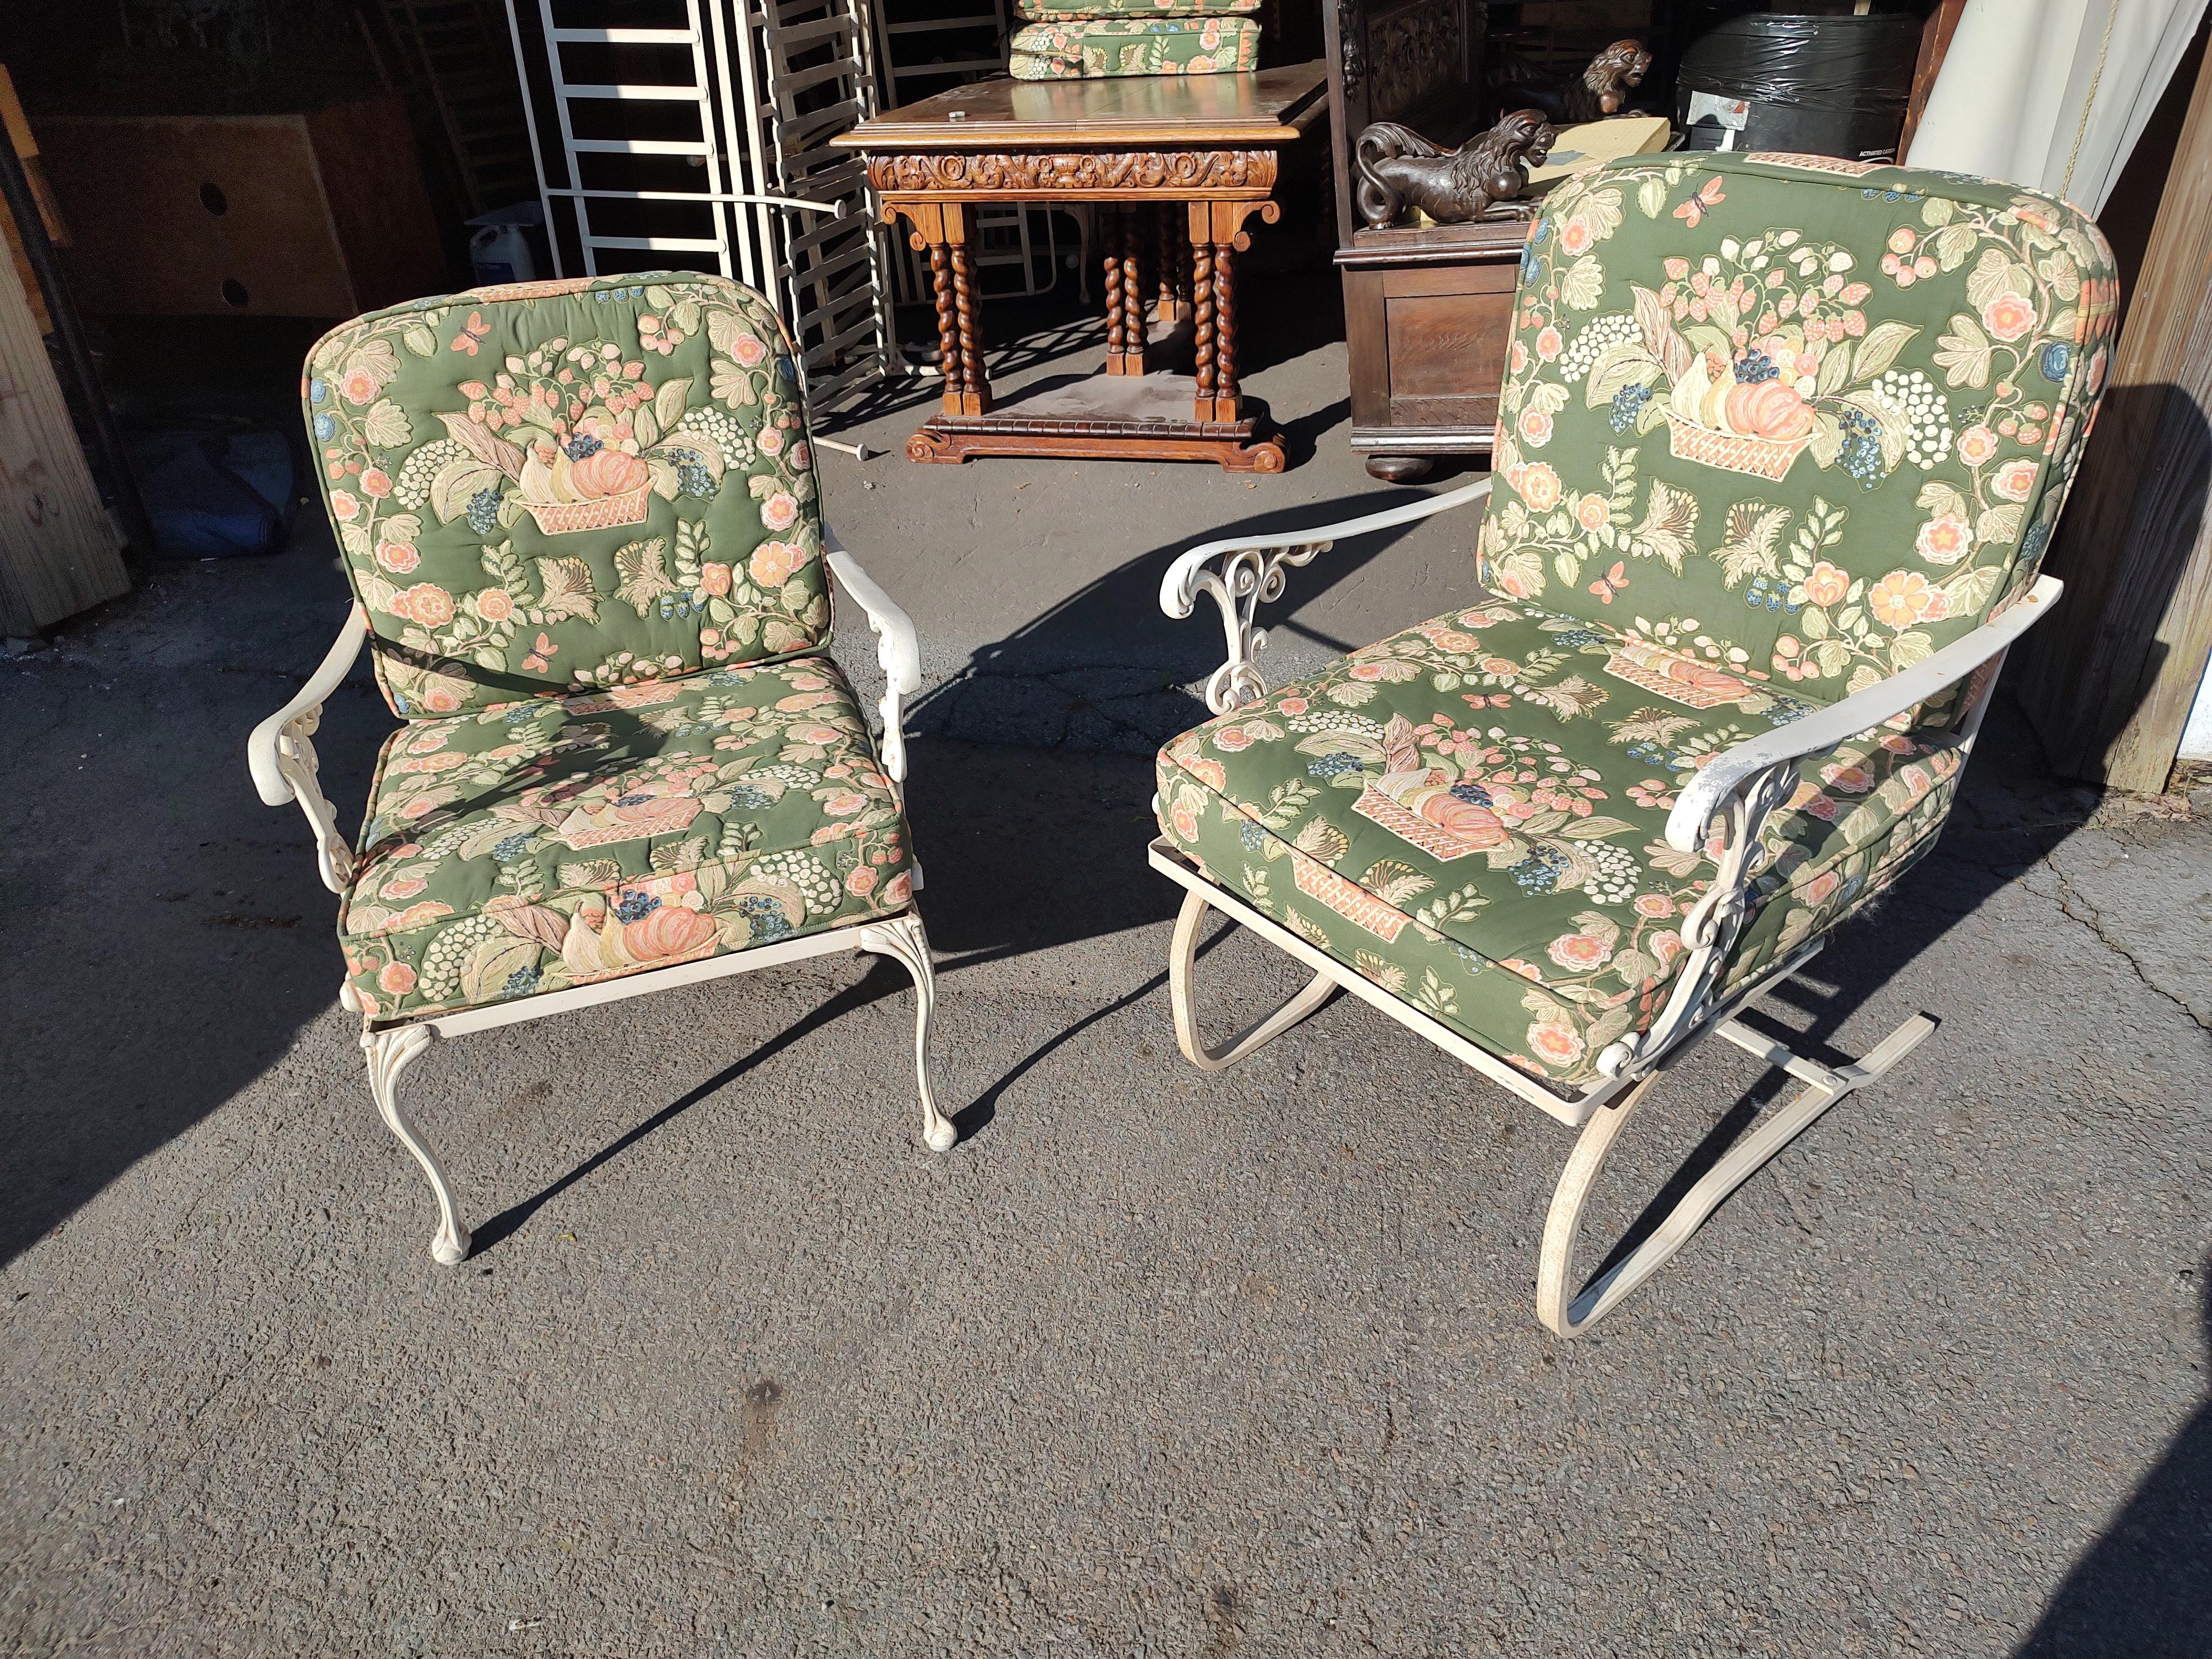 Pair of Molla Garden Lounge Chairs Cast Aluminum with Embossed Pattern Cushions For Sale 3